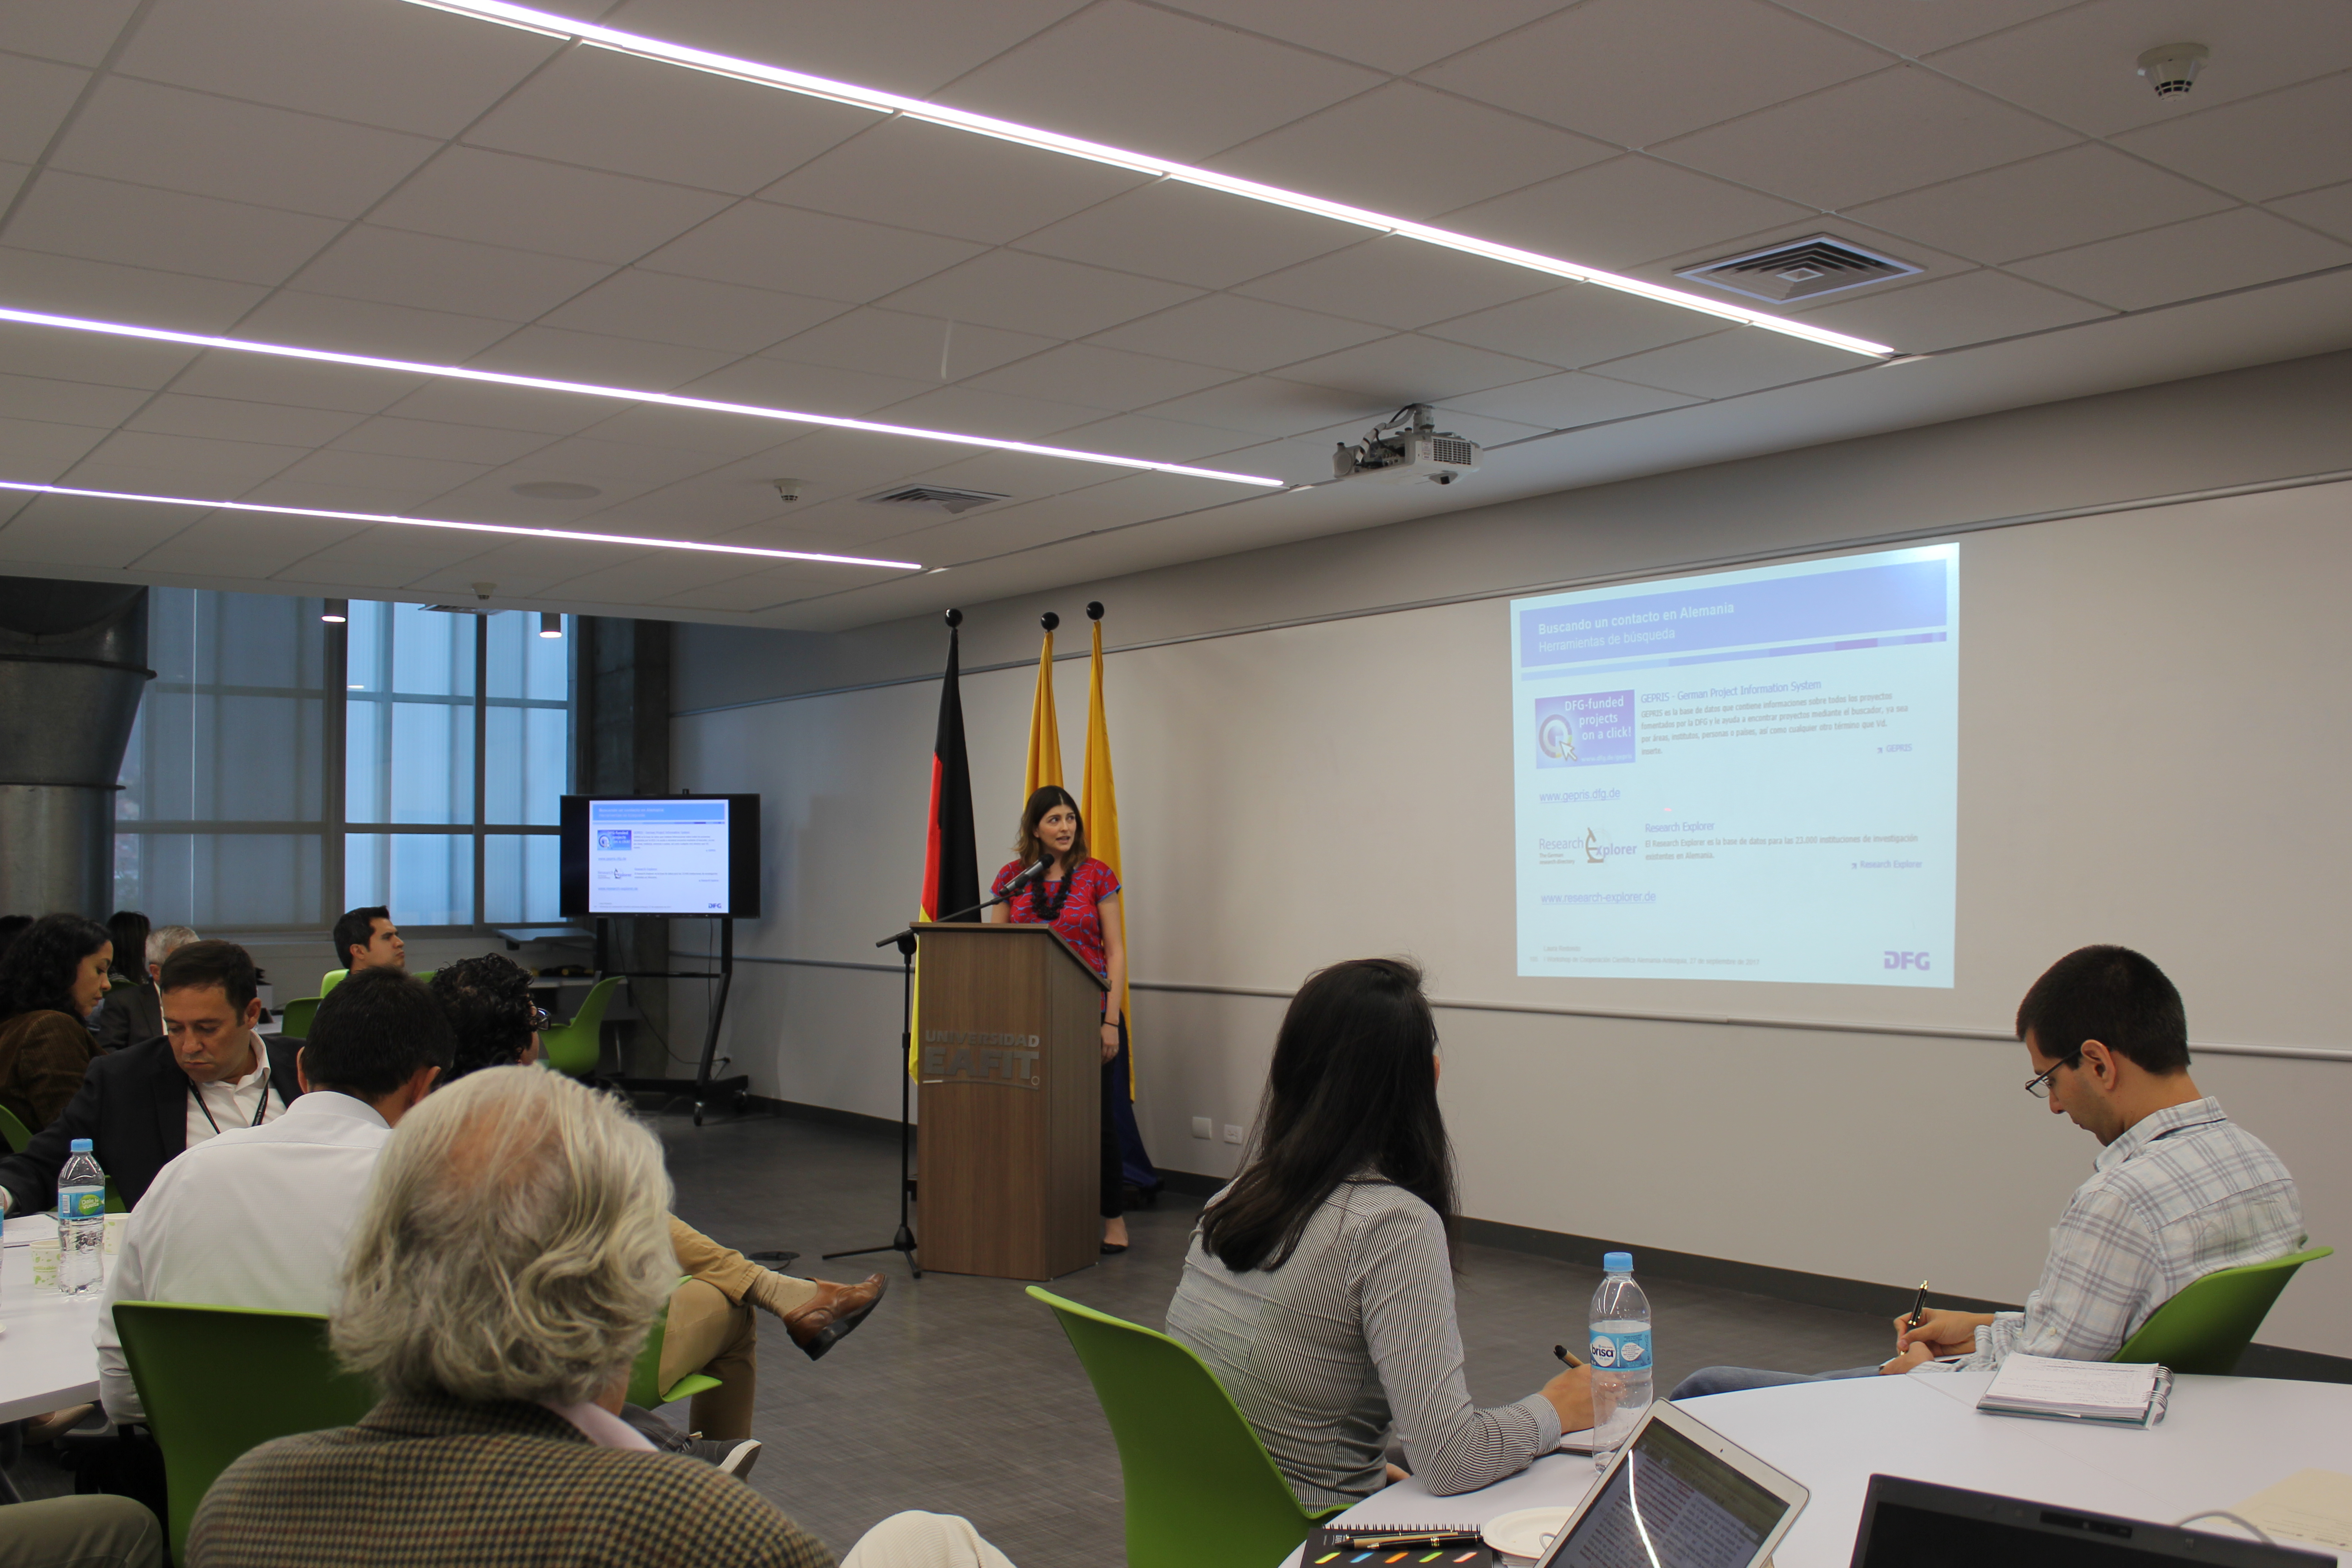 Laura Redondo presented the DFG Office Latin America and its activities in the region